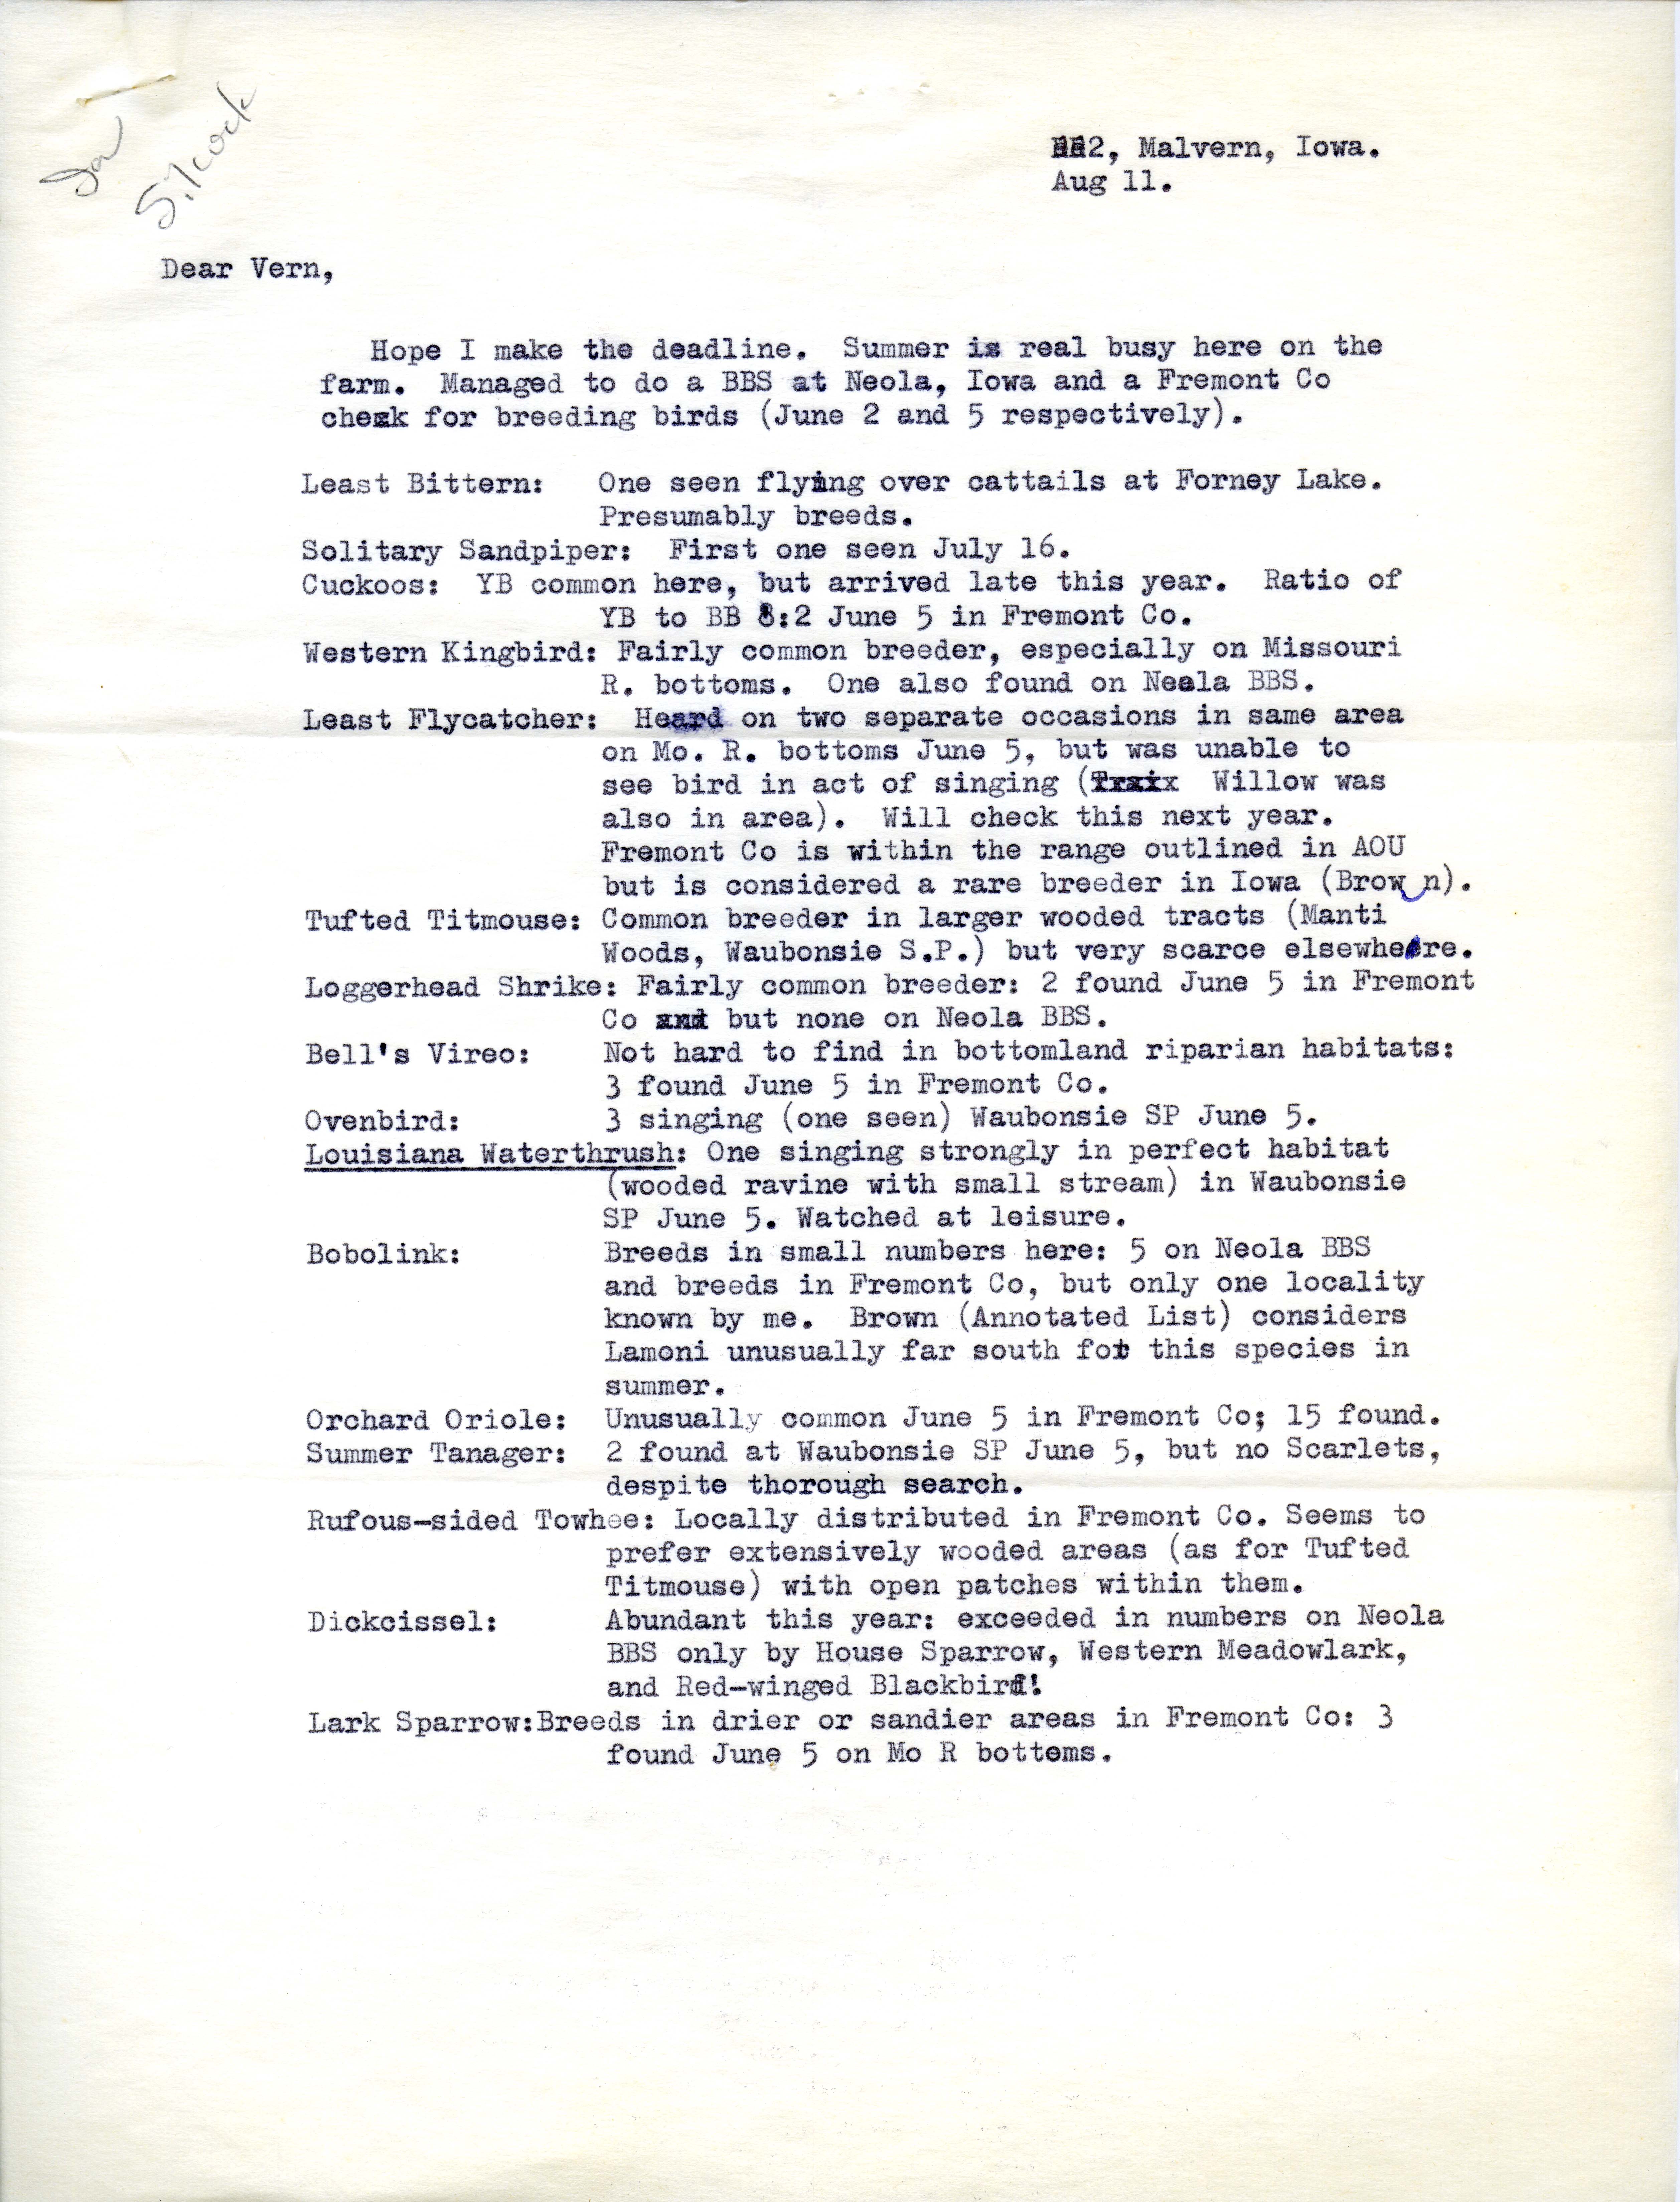 Letter from Ross Silcock to Iowa Ornithologists' Union regarding bird sightings and locations, August 11, 1976